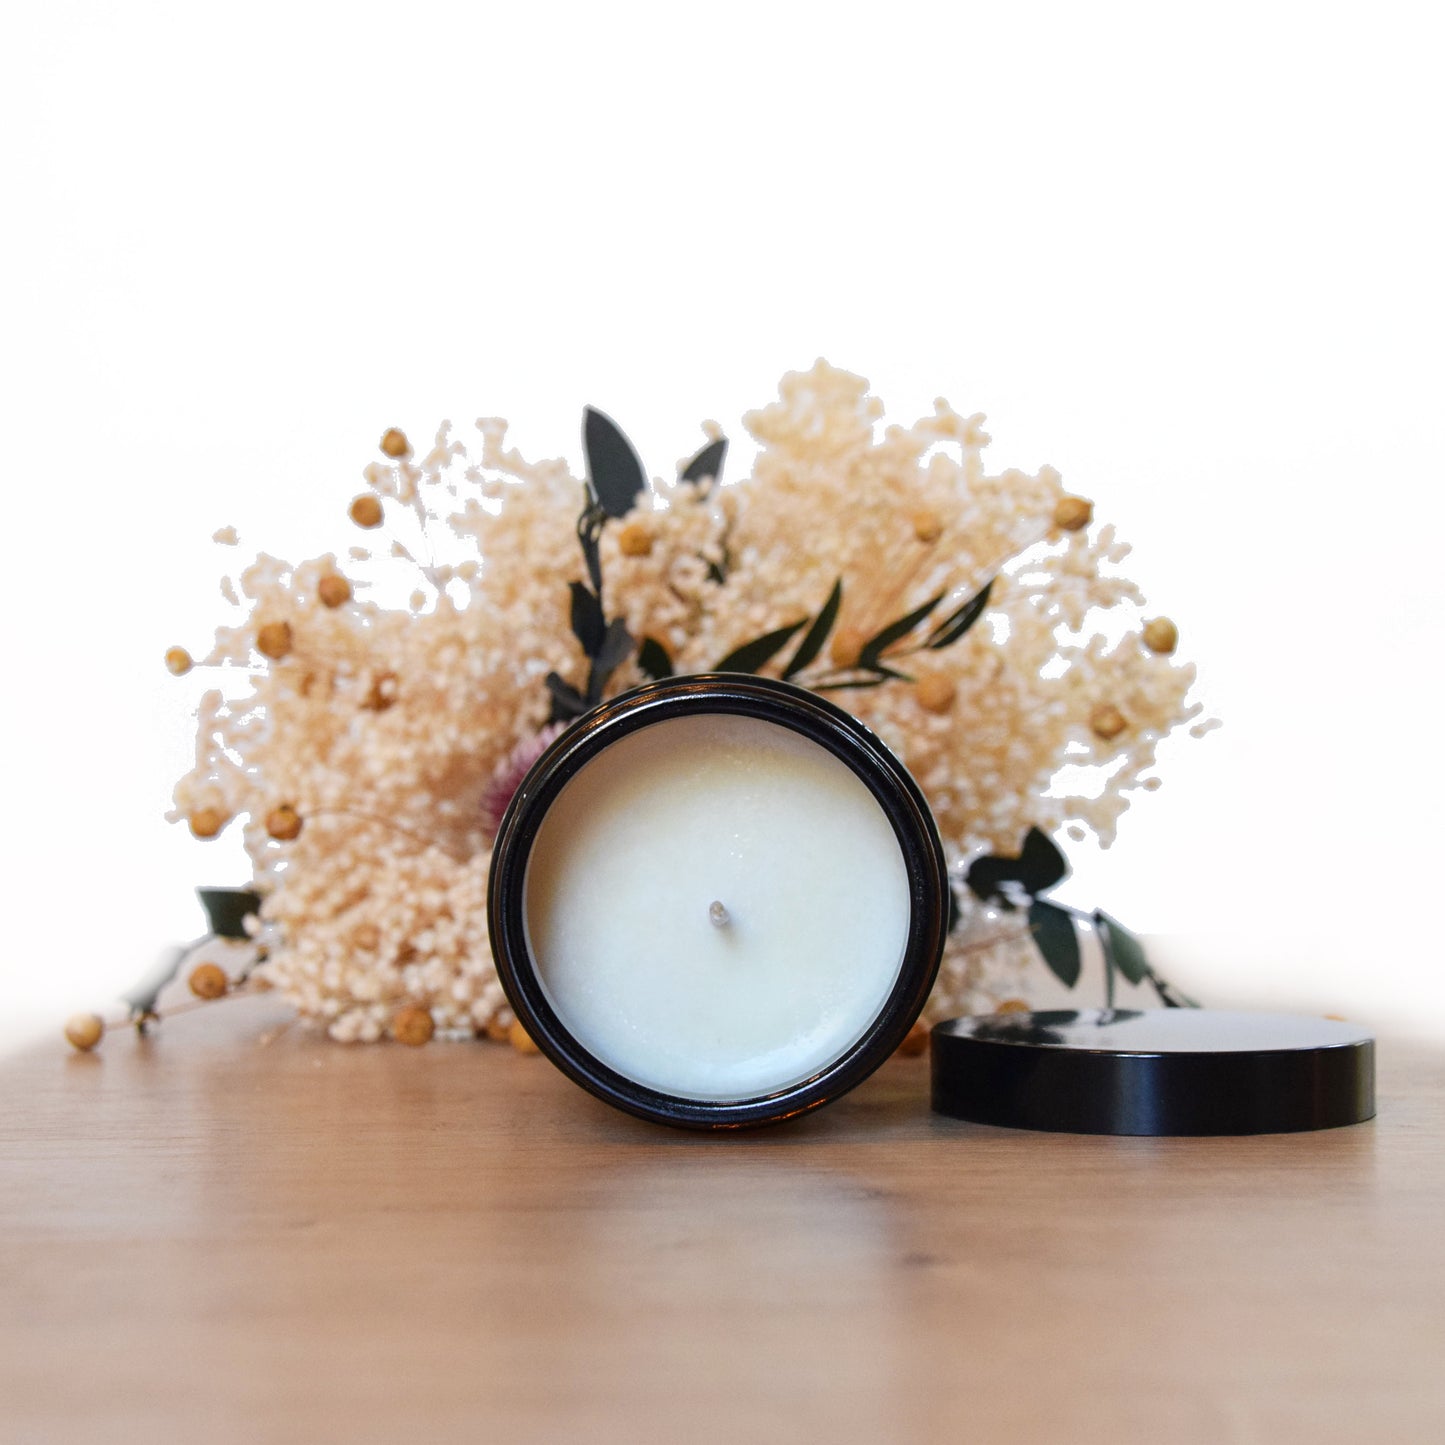 "Tuberose" scented candle